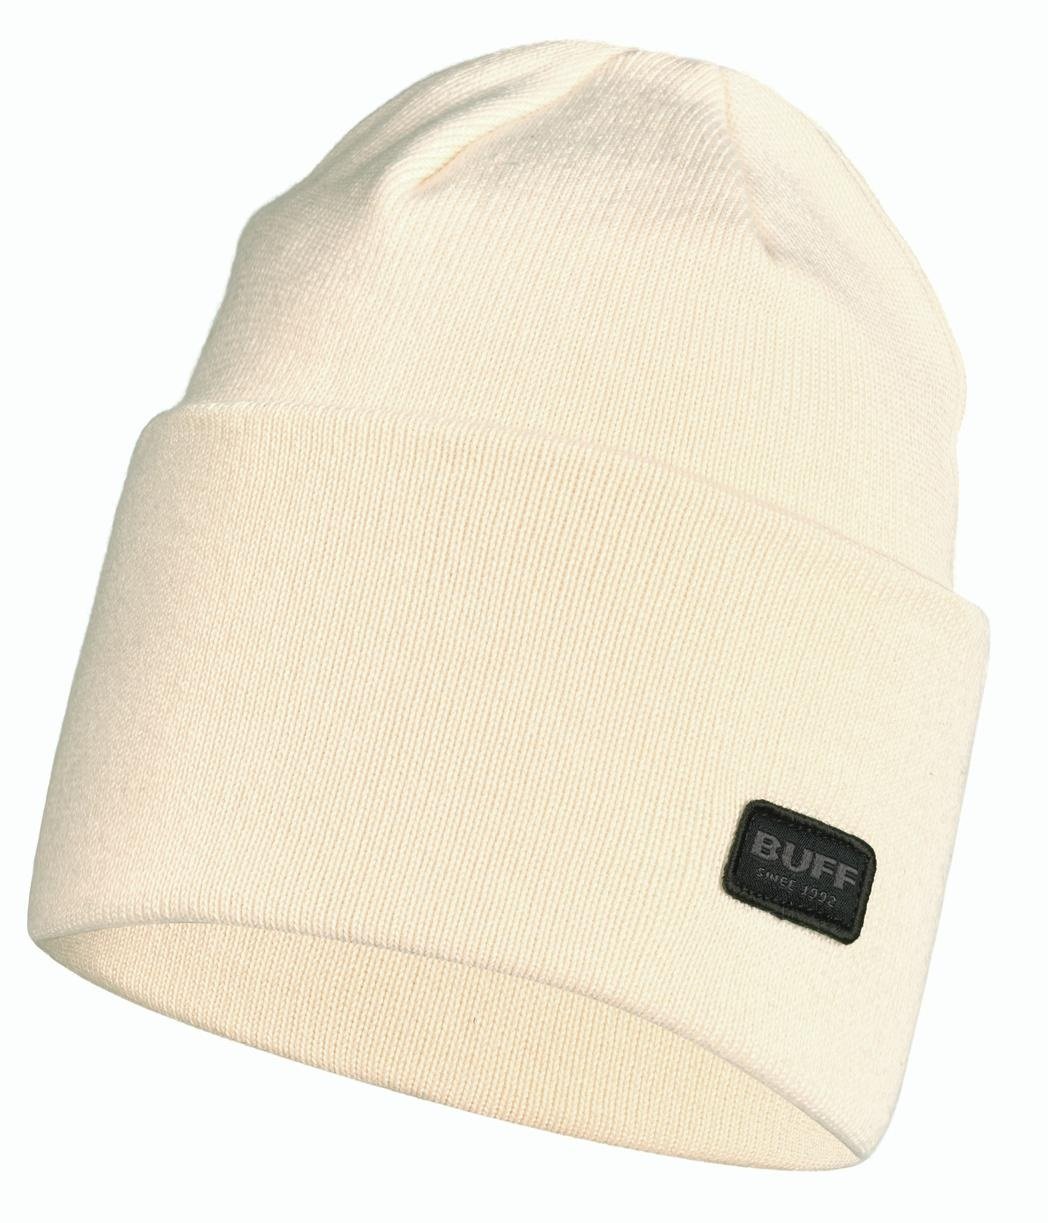 Шапка Buff Knitted Hat Niels Cru US:One size, 126457.014.10.00